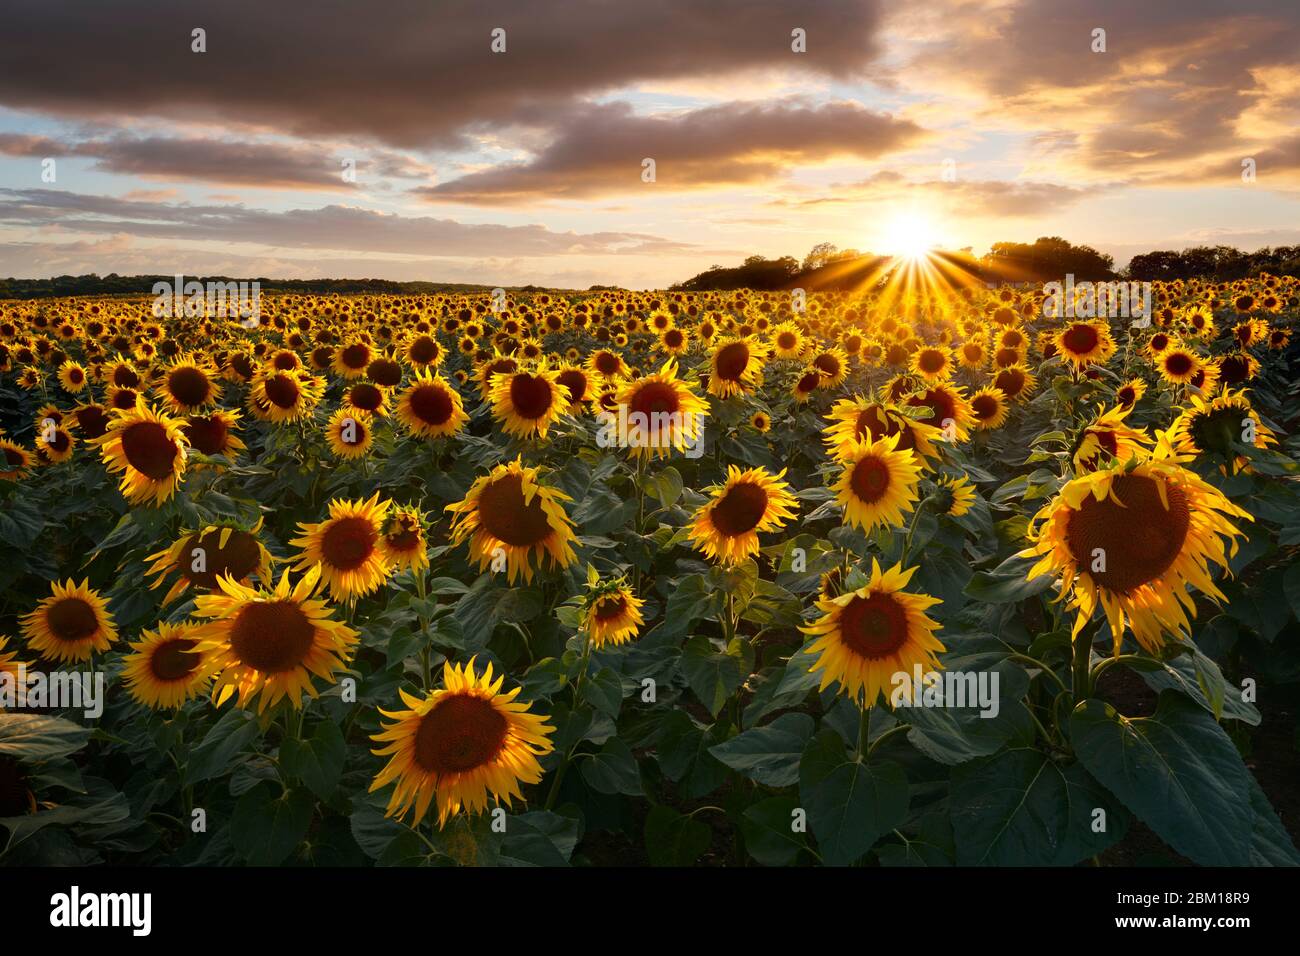 The sun highlighting a field of sunflowers, West Sussex. Stock Photo